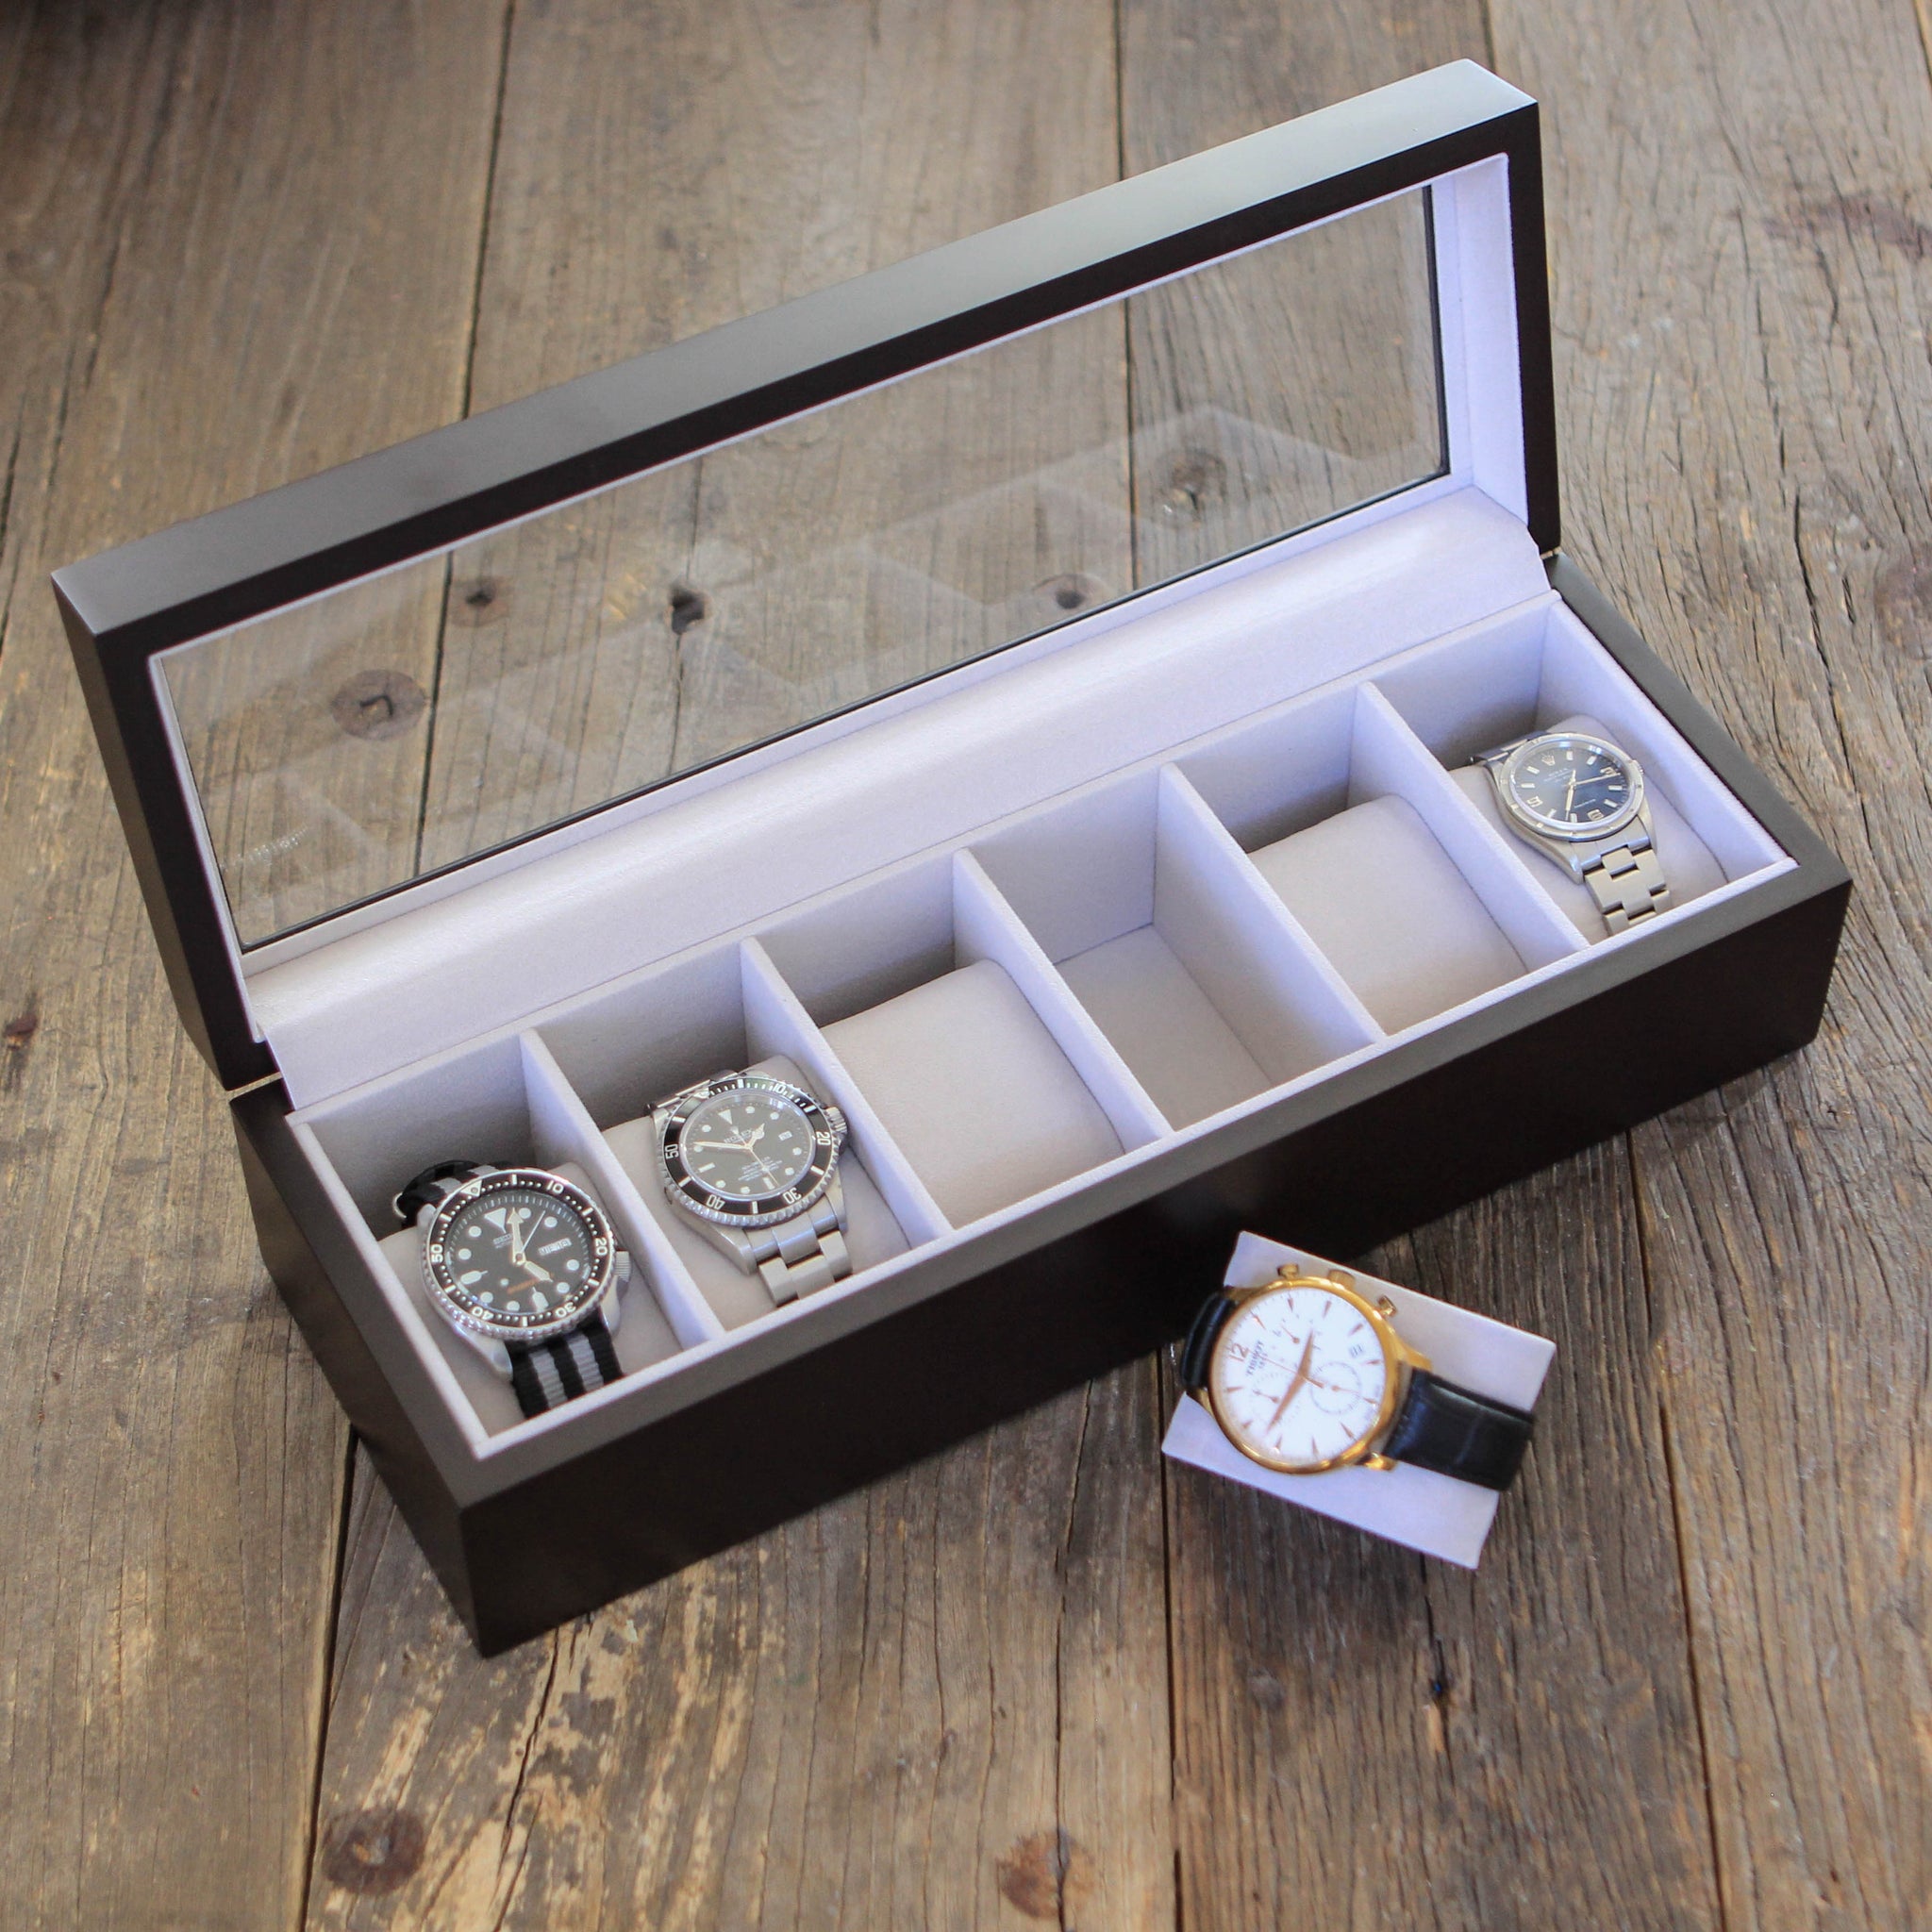 Solid Wood Watch Box - 6 Slot by Case Elegance